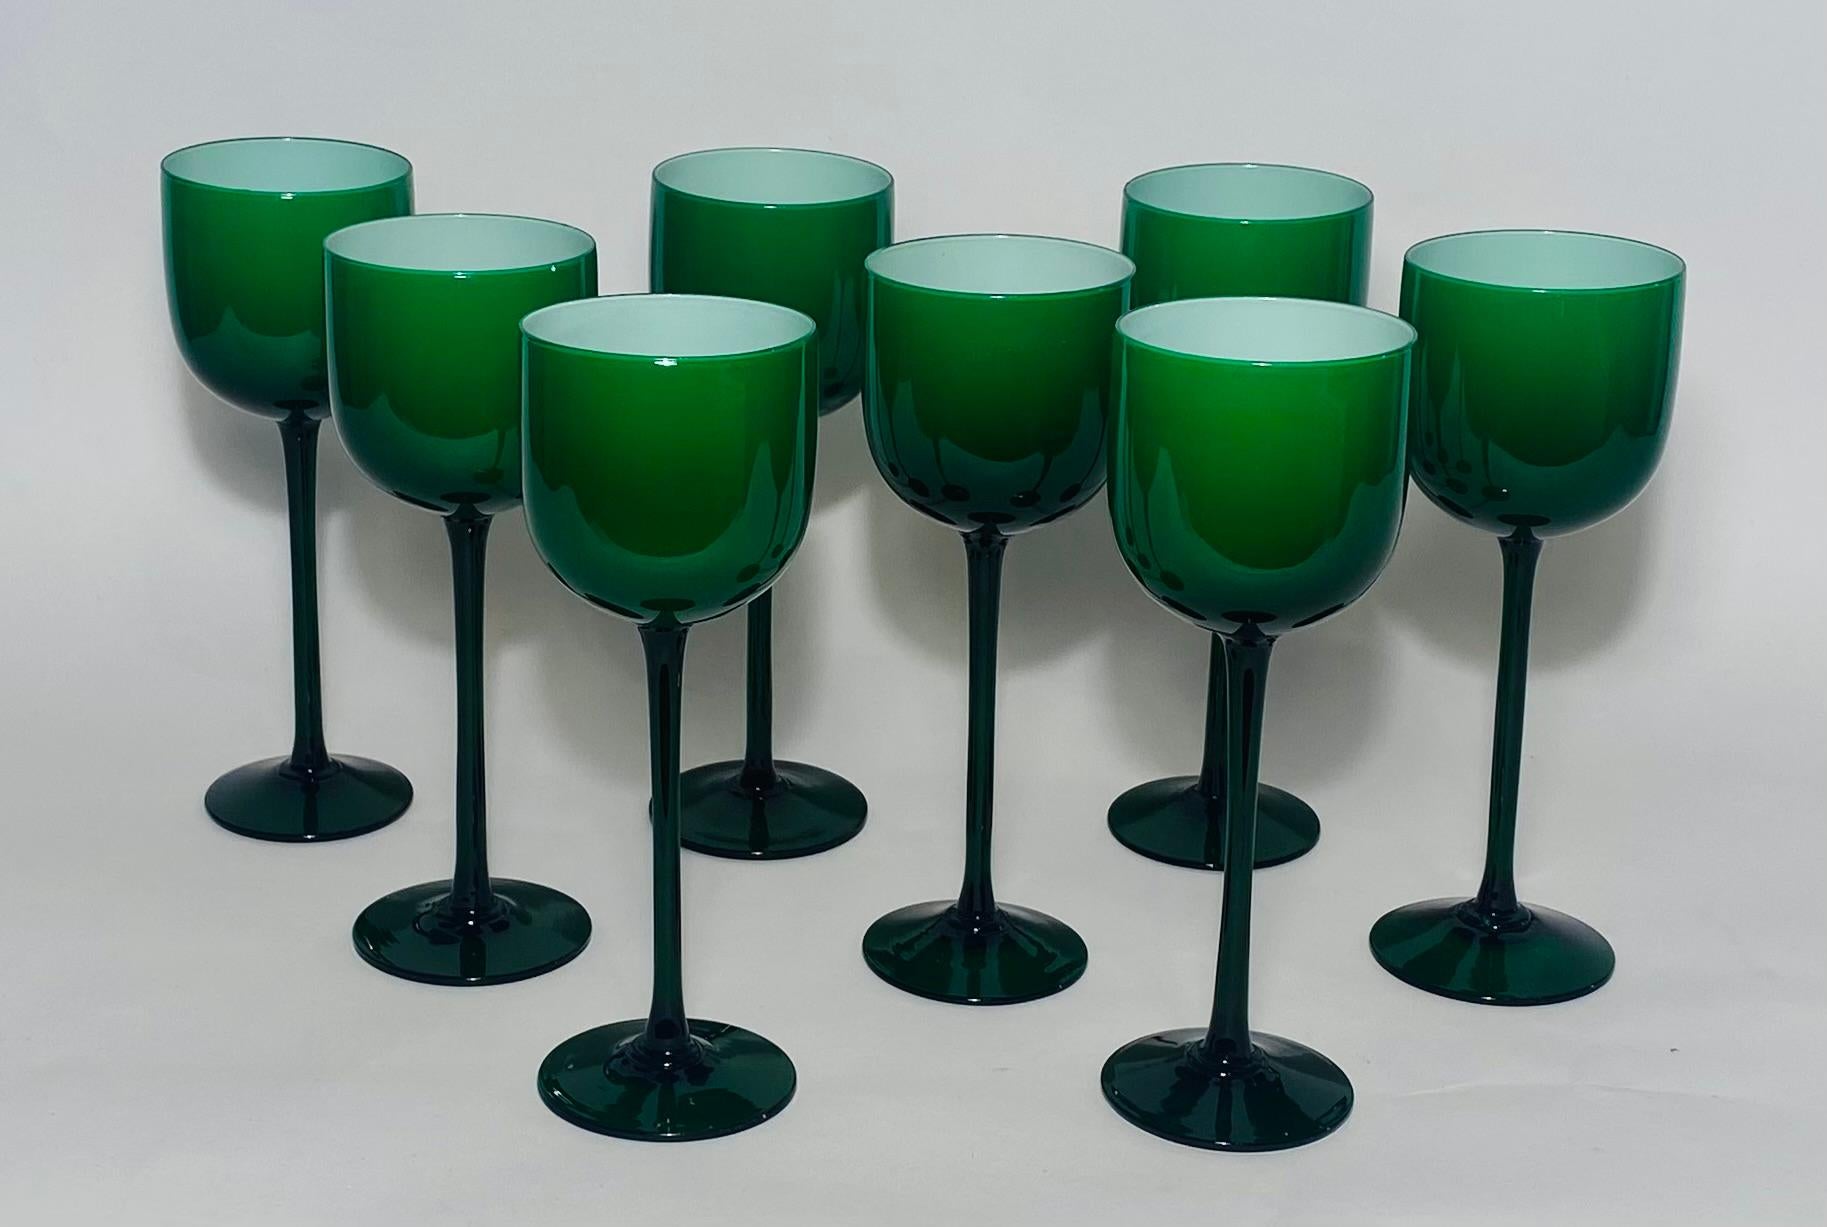 A striking set of vibrant green and white cased goblets measuring a generous nine and one half inches tall. Popular in the 1960's and ready to mix and match in with today's tables. The color is rich and dark green and also features an elegant stem